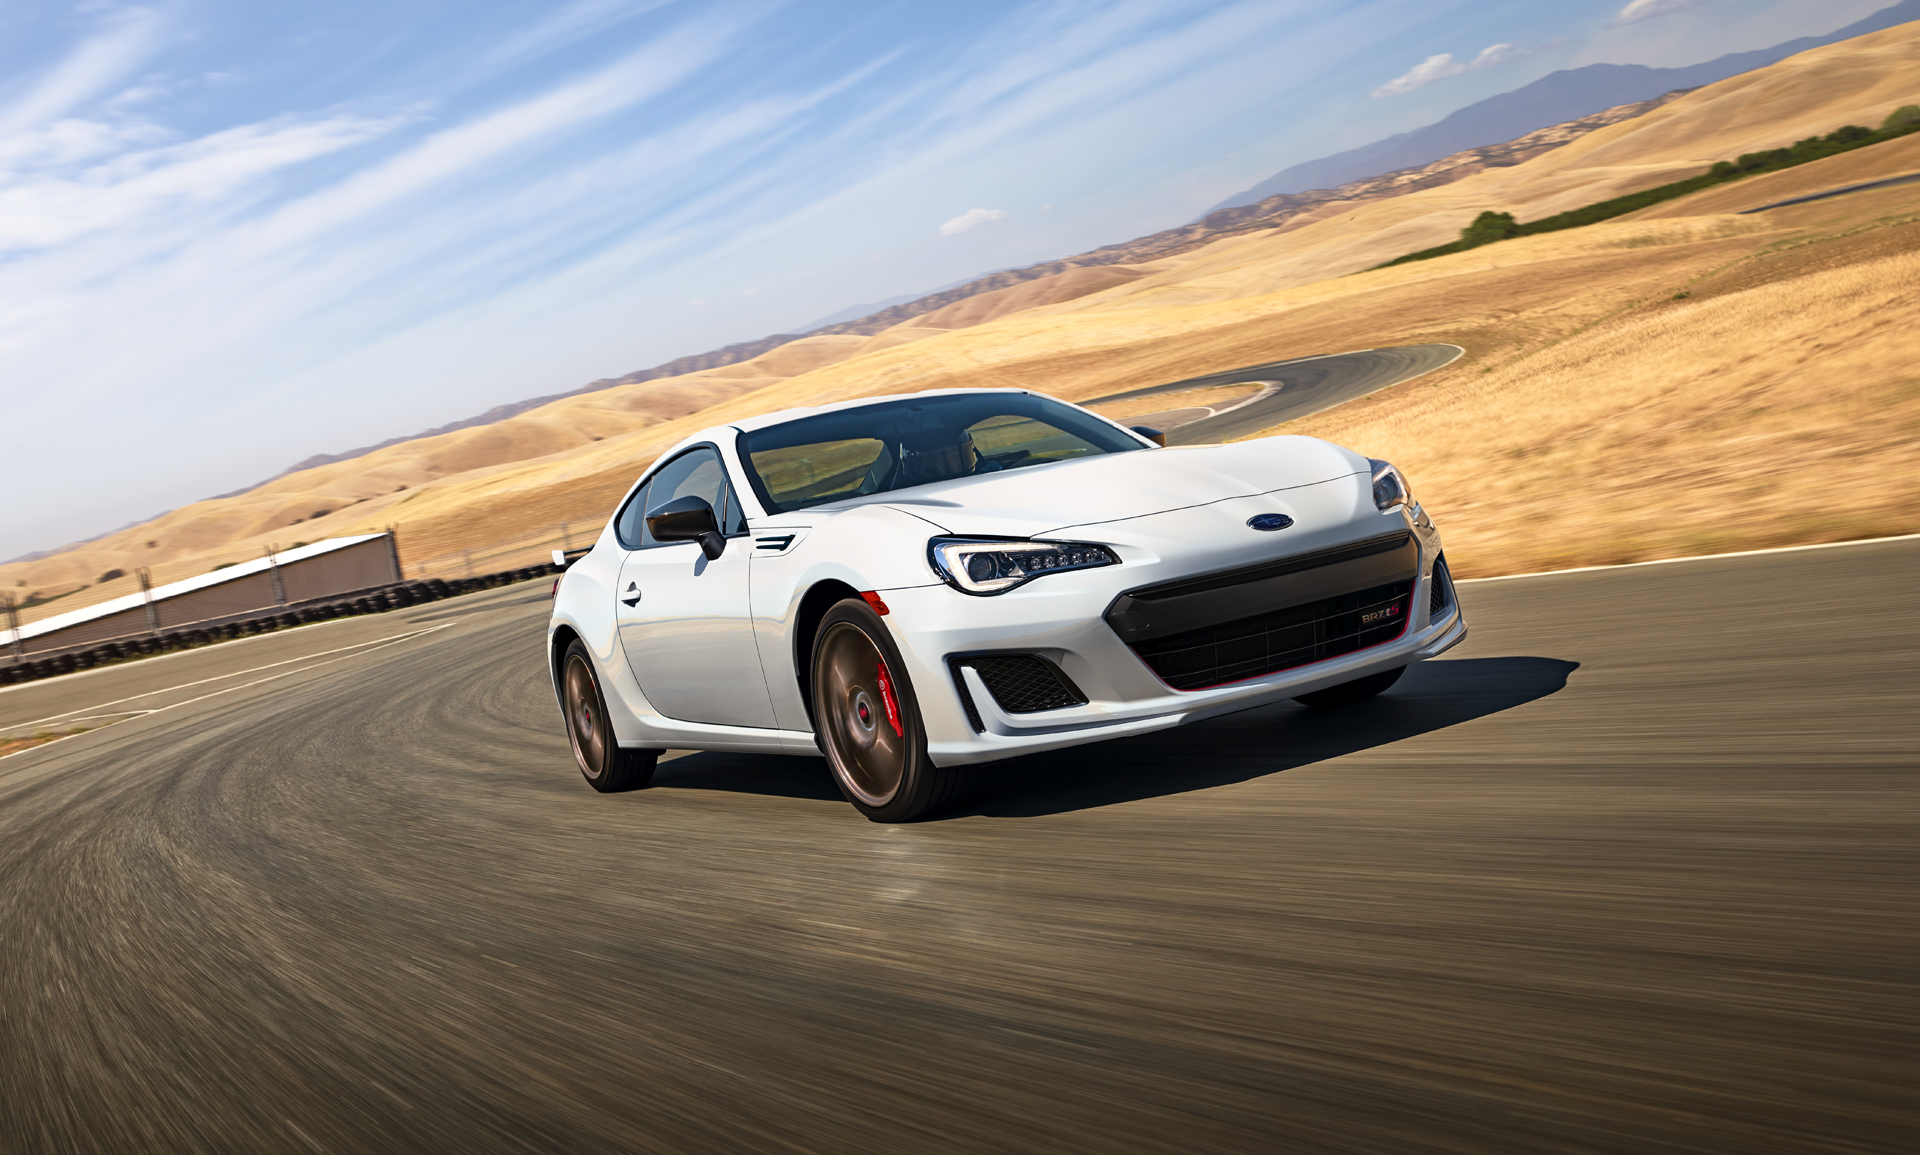 Subaru's trackfocused BRZ tS returns for 2020with understated looks